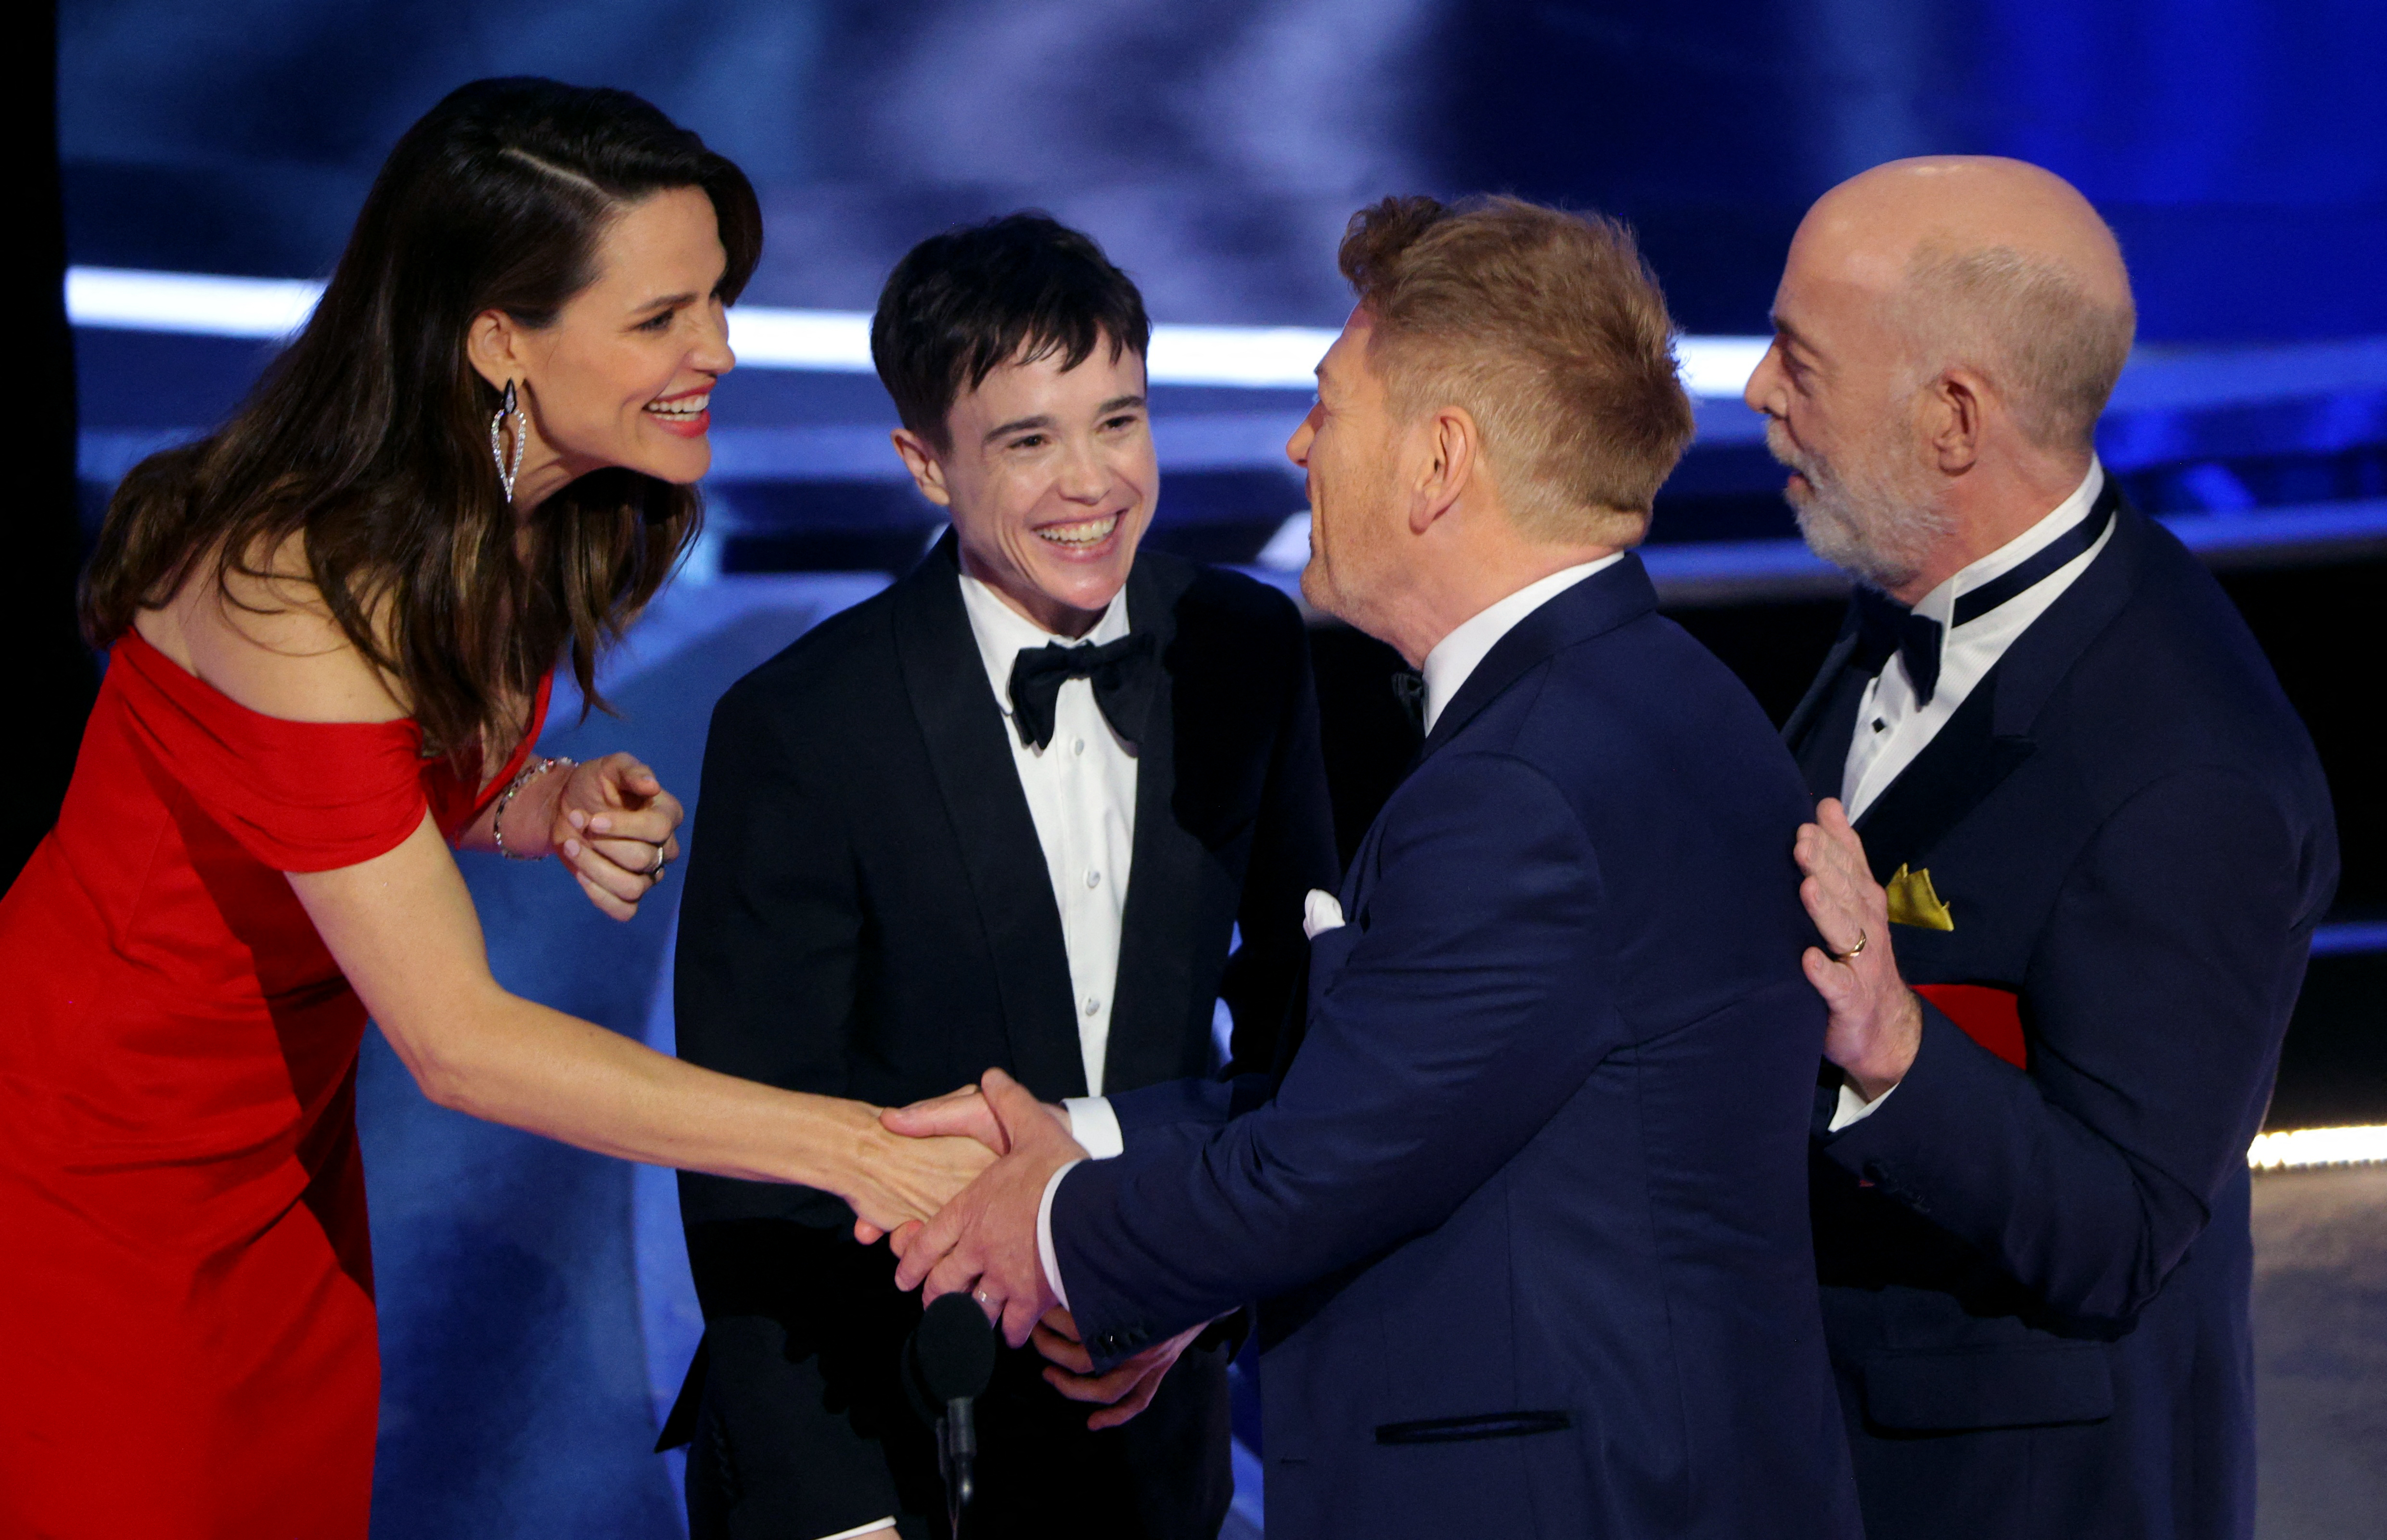 Kenneth Branagh accepts the Oscar for Best Original Screenplay for "Belfast" from presenters Jennifer Garner (L), Elliot Page, and J.K. Simmons at the 94th Academy Awards in Hollywood, Los Angeles, California, U.S., March 27, 2022. REUTERS/Brian Snyder REFILE - ADDING ADDITIONAL CAPTION INFO